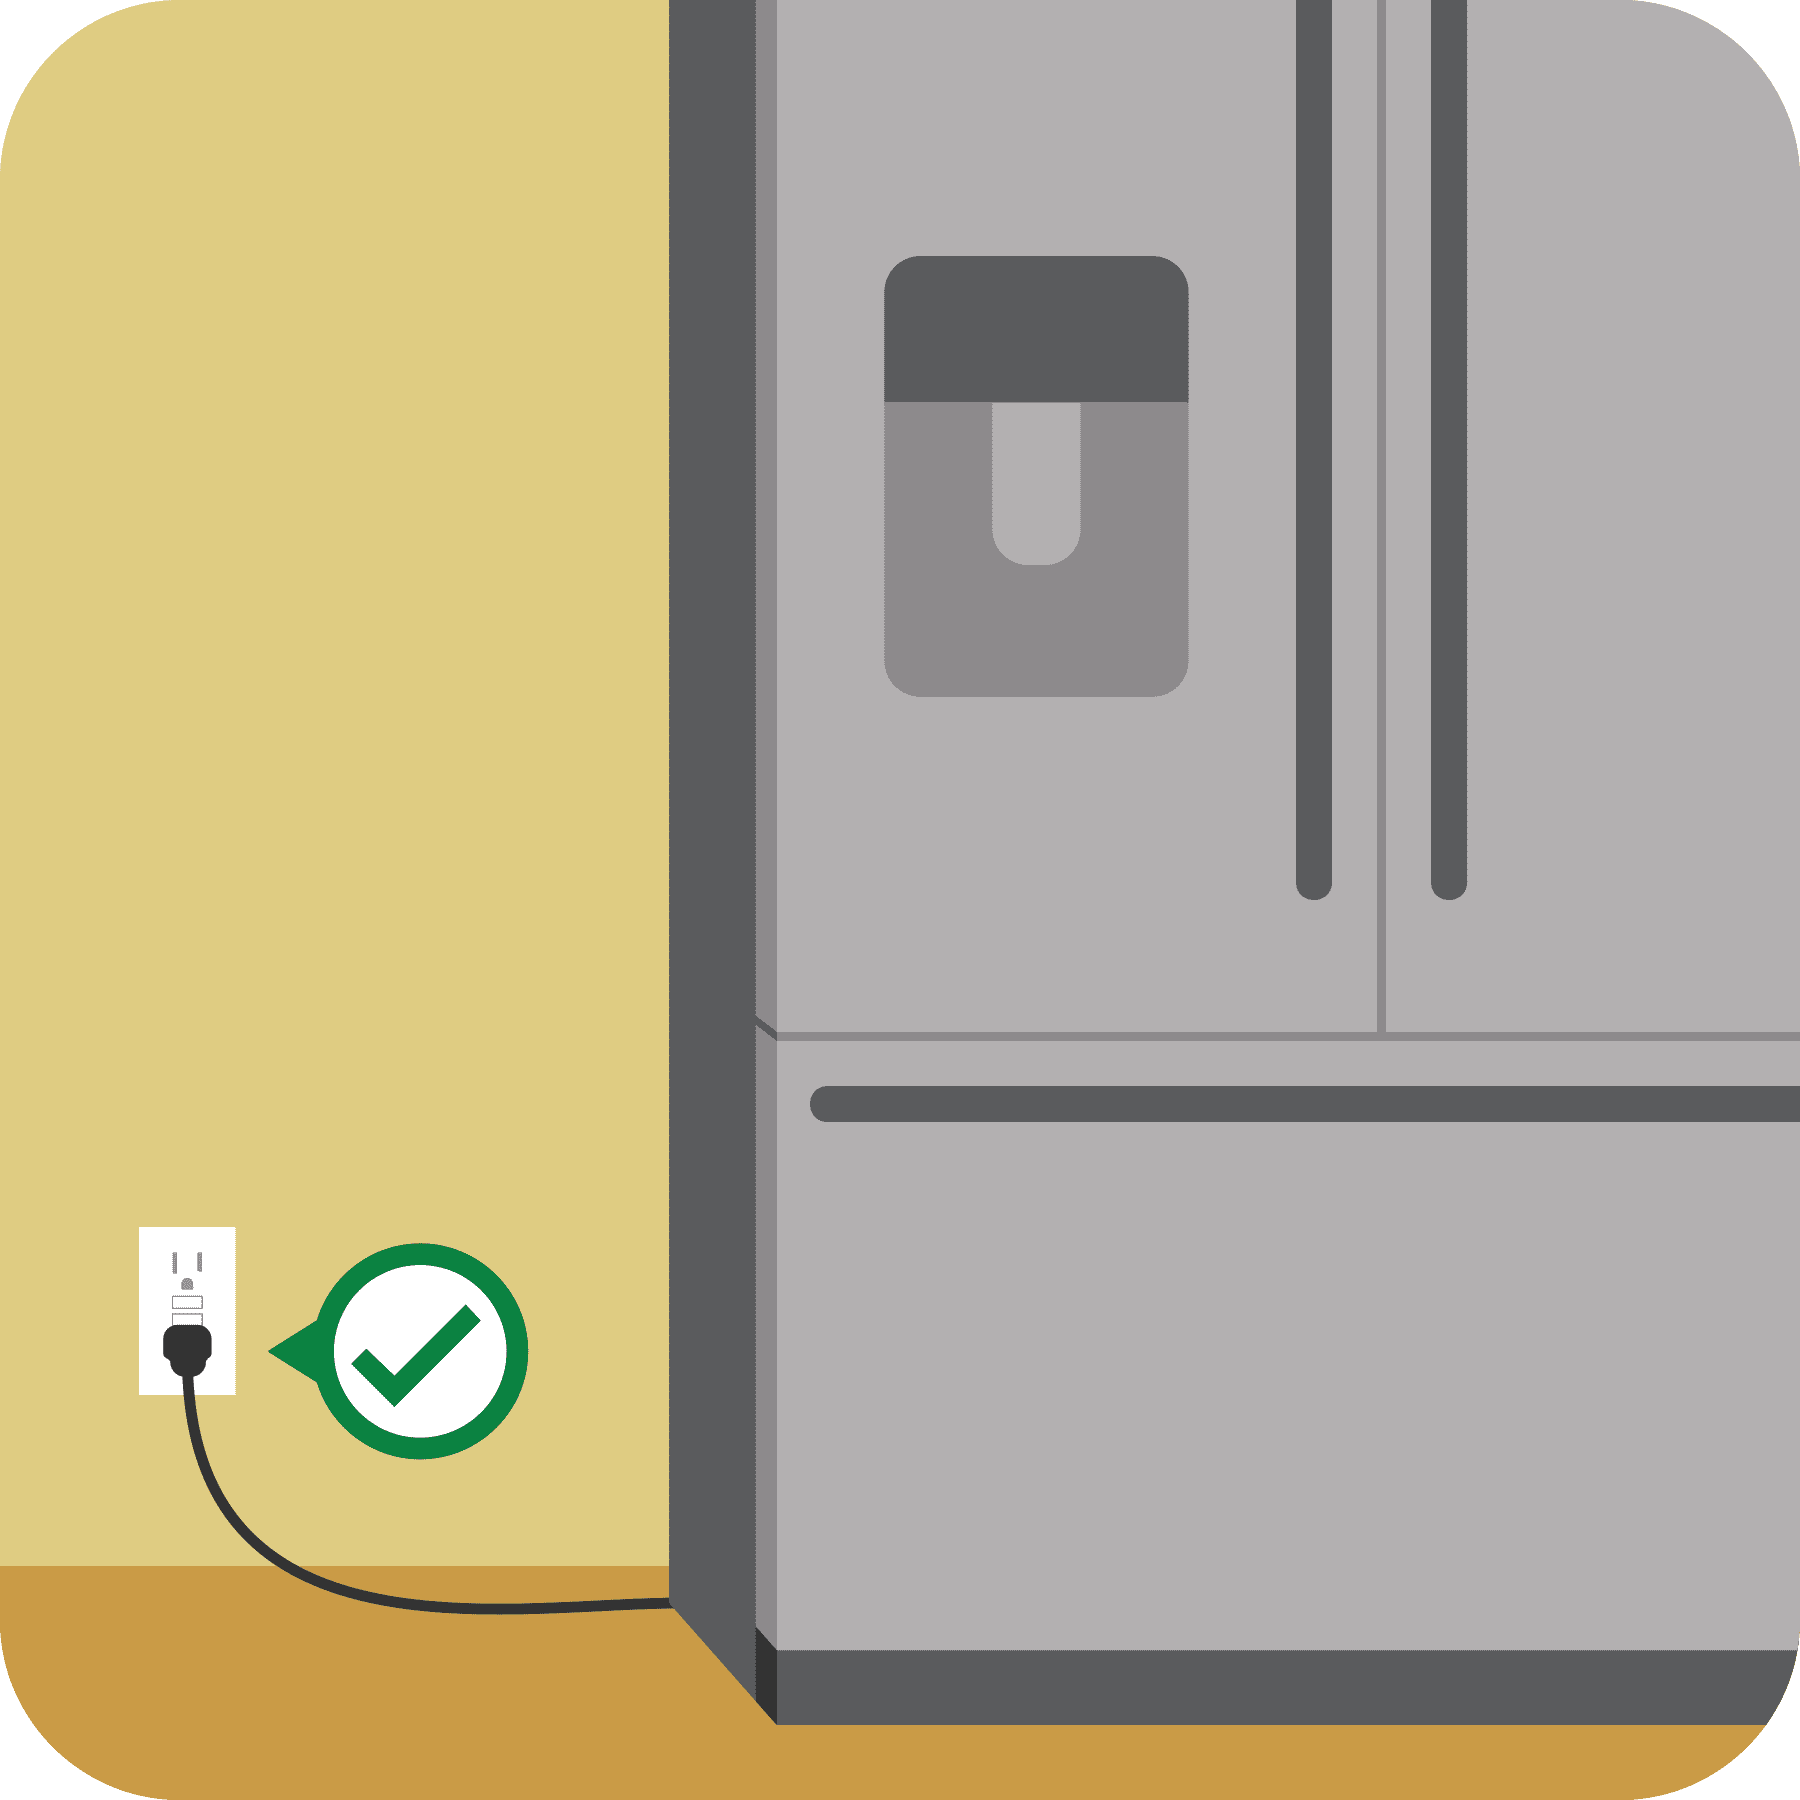 A refrigerator is plugged into a wall outlet. A green checkmark is over the outlet.